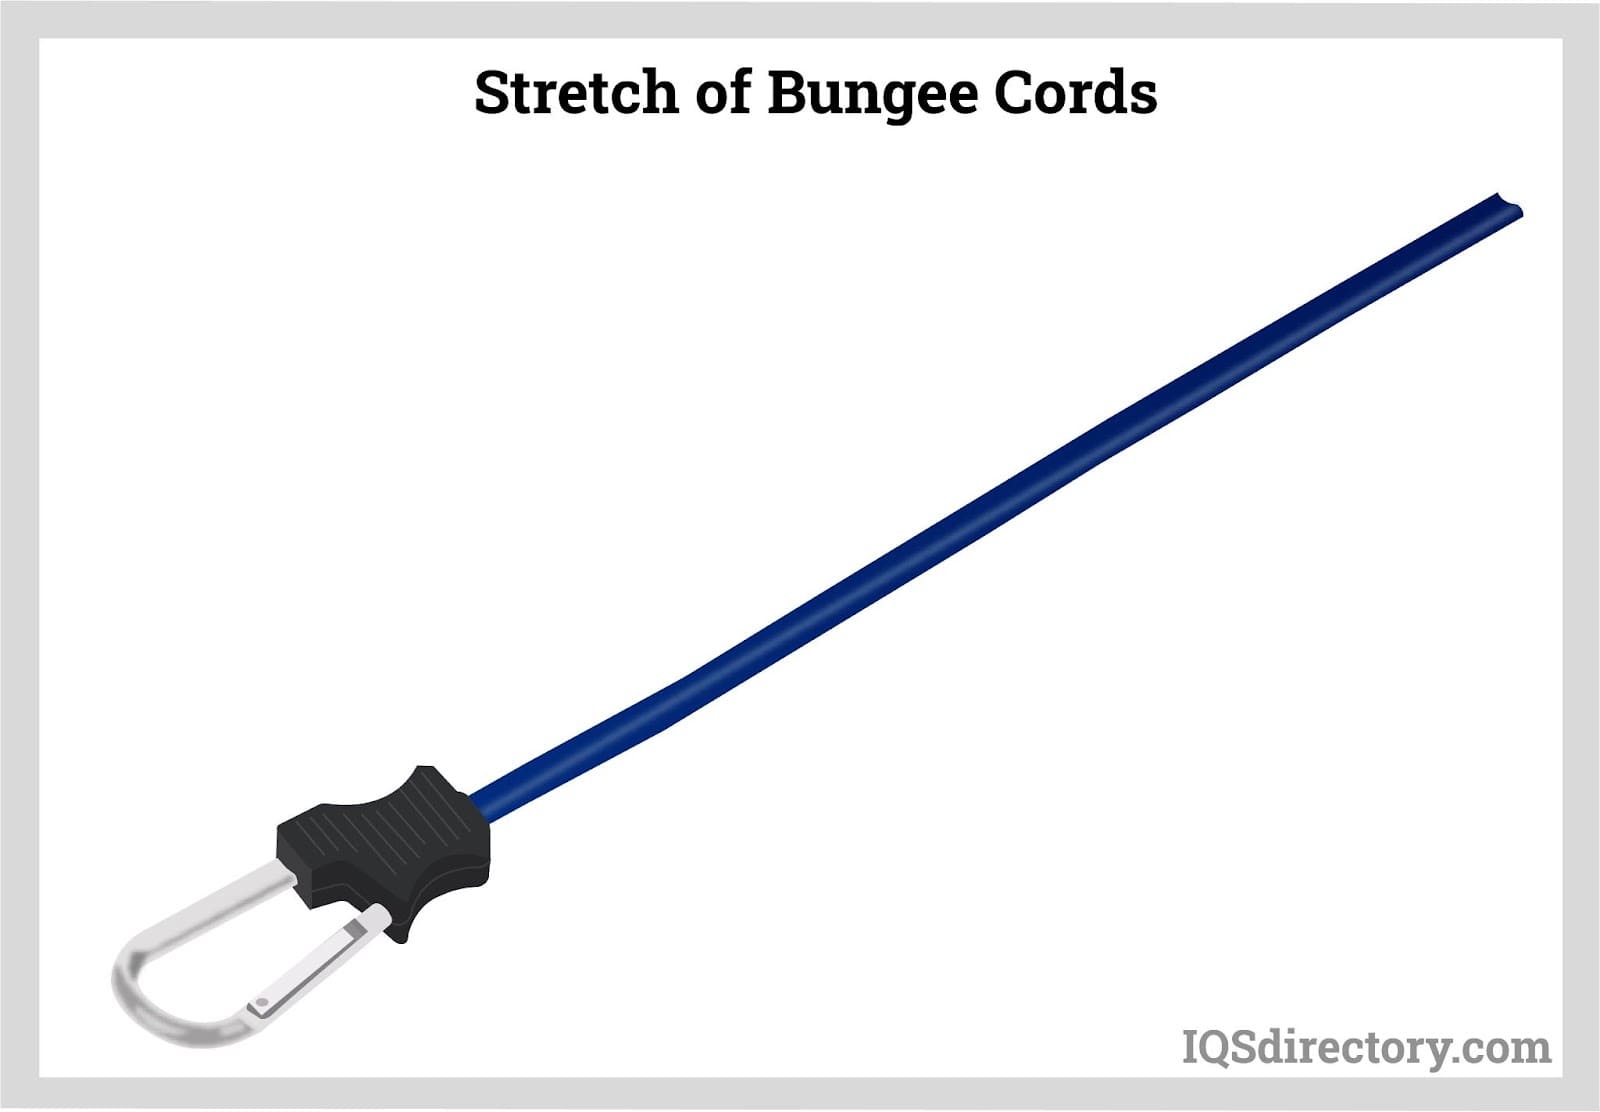 Stretch of Bungee Cords